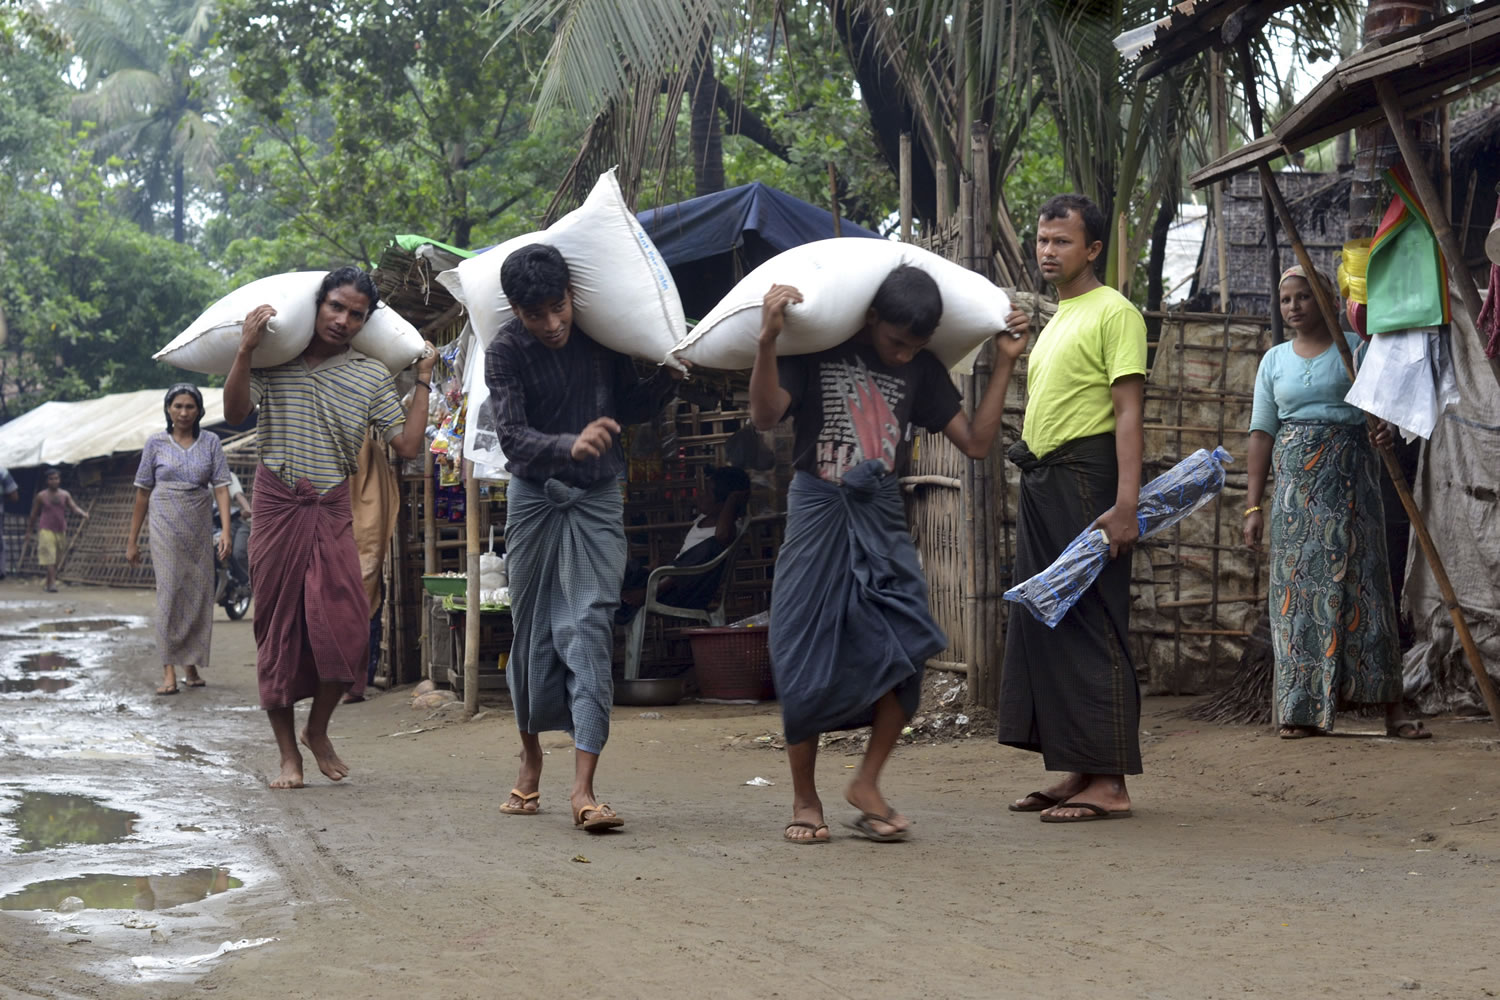 Men carry rice sacks as others look on at a refugee camp in Sittwe, western Myanmar, on Wednesday.